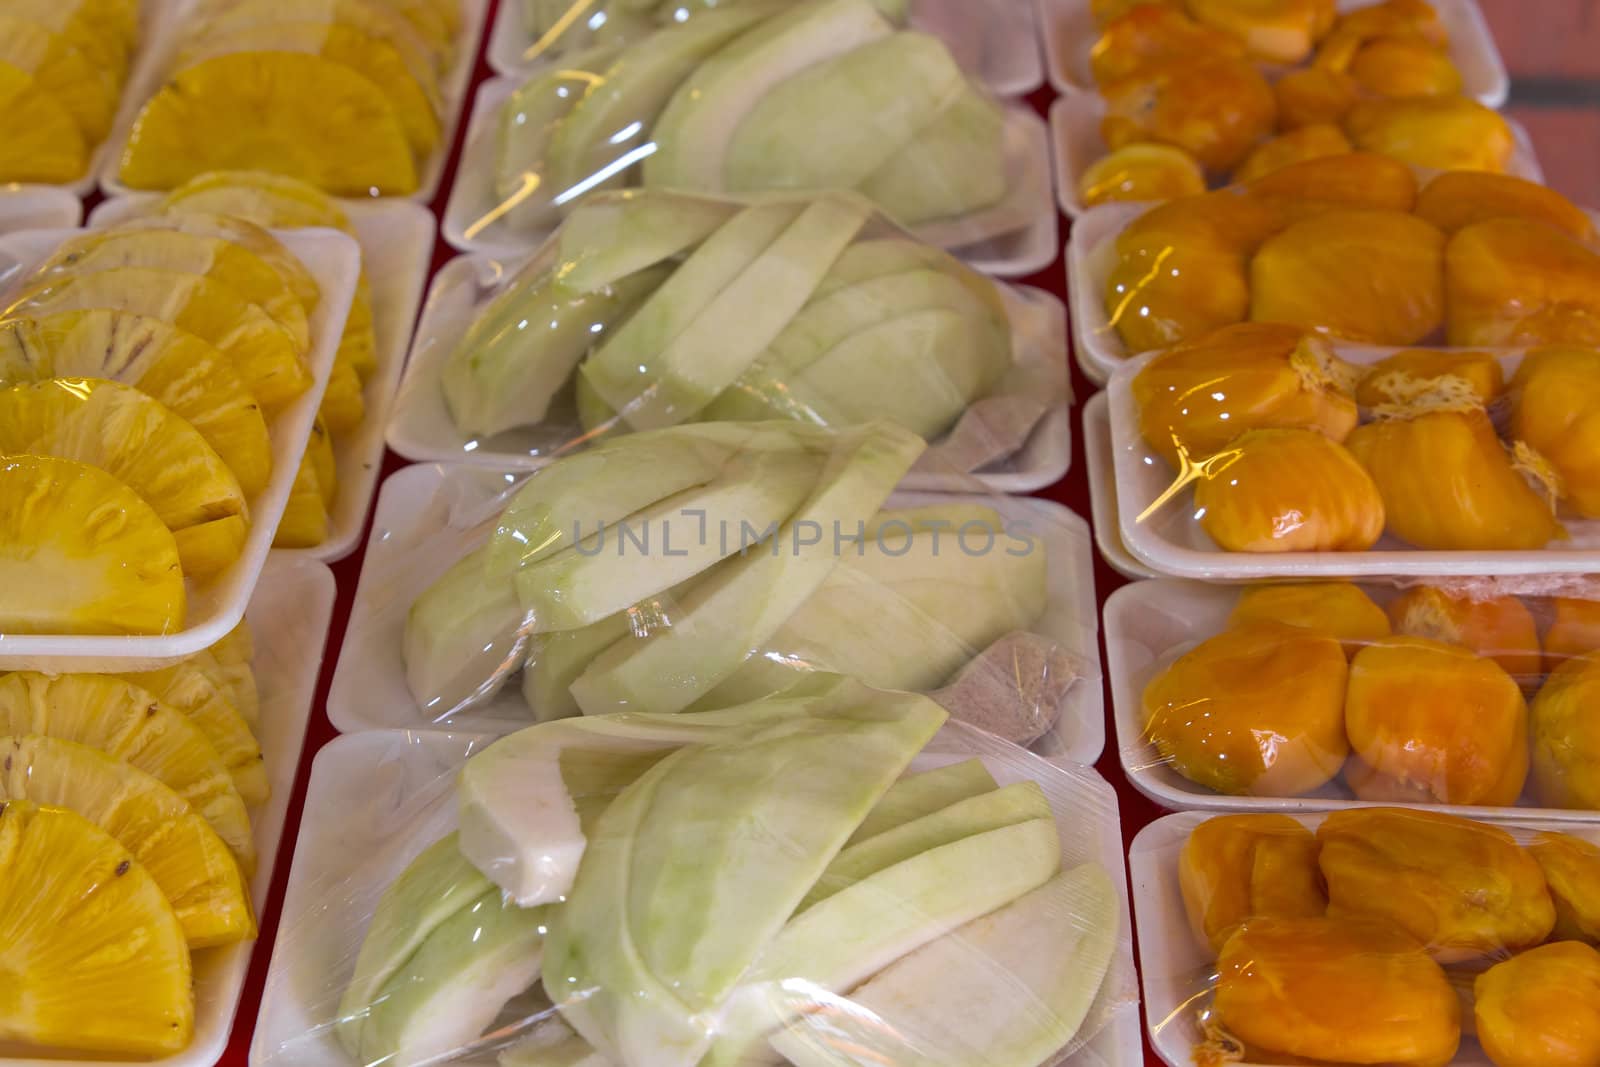 Fresh Fruits Cut and Shrink Wrapped by Davidgn